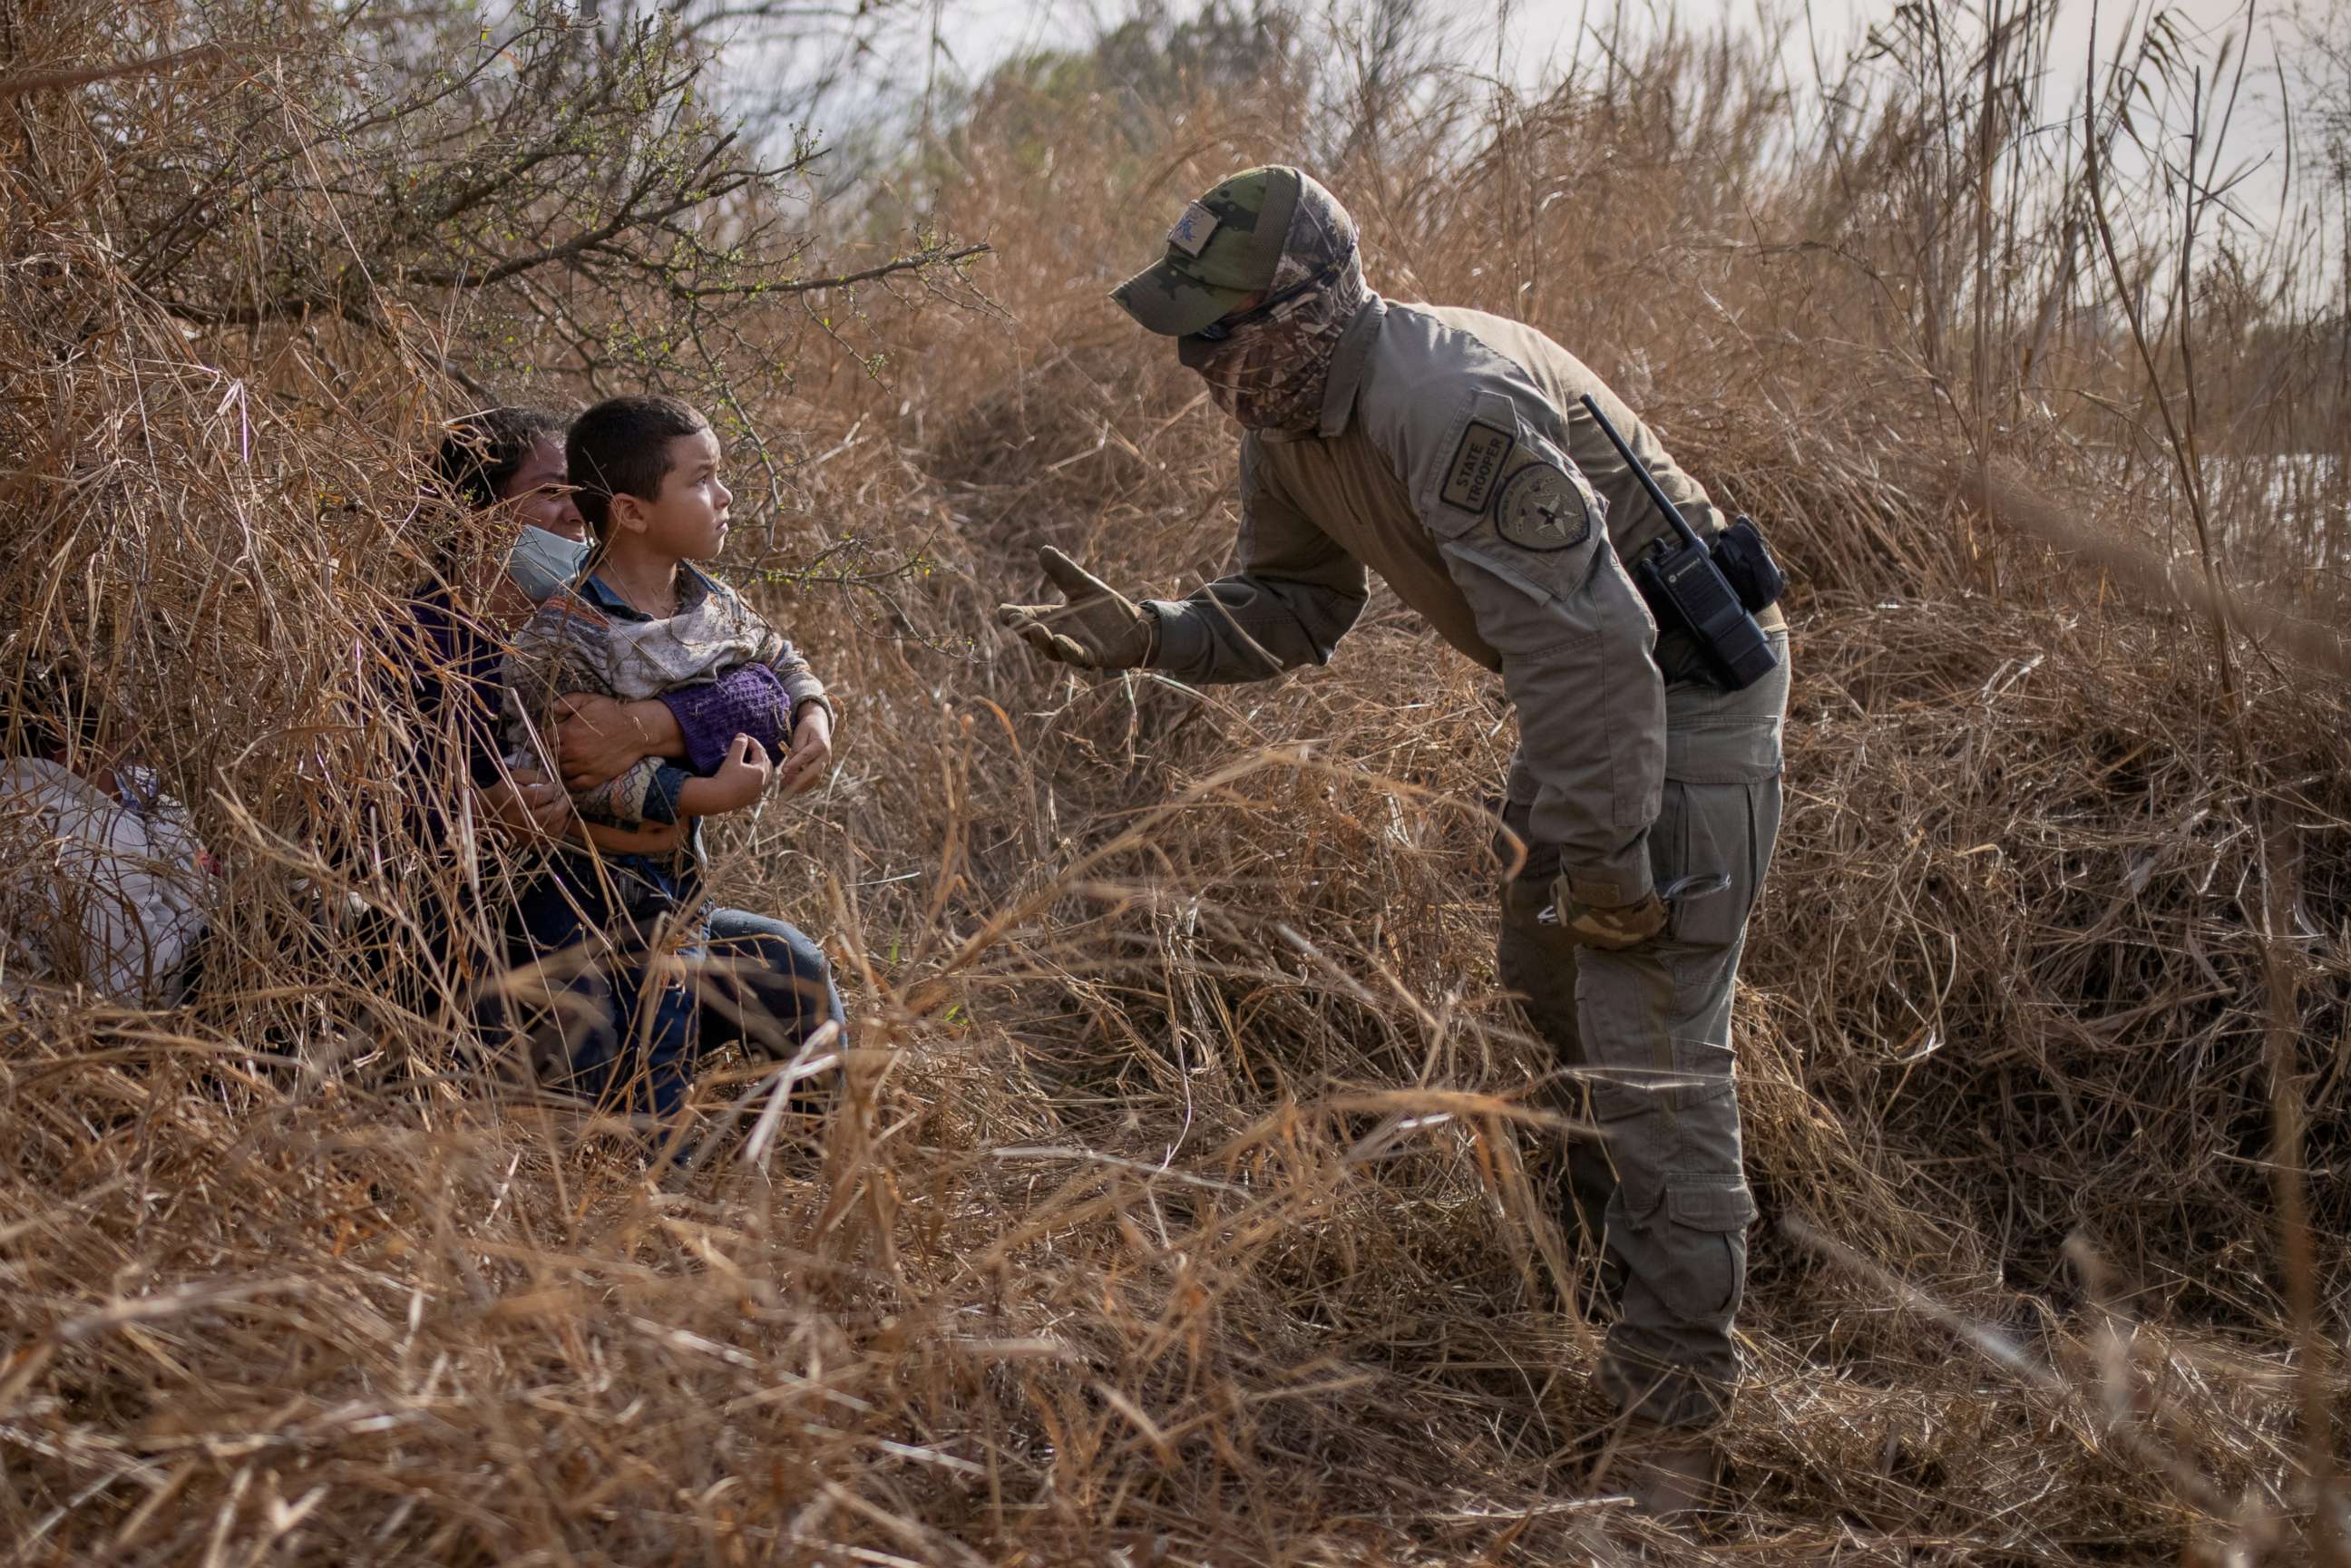 FILE PHOTO: A Texas State Trooper asks asylum seeking migrants Edith and her son Harbin Ordonez, 4, to come out of hiding after the Honduran nationals crossed the Rio Grande river into the United States from Mexico on March 9, 2021.